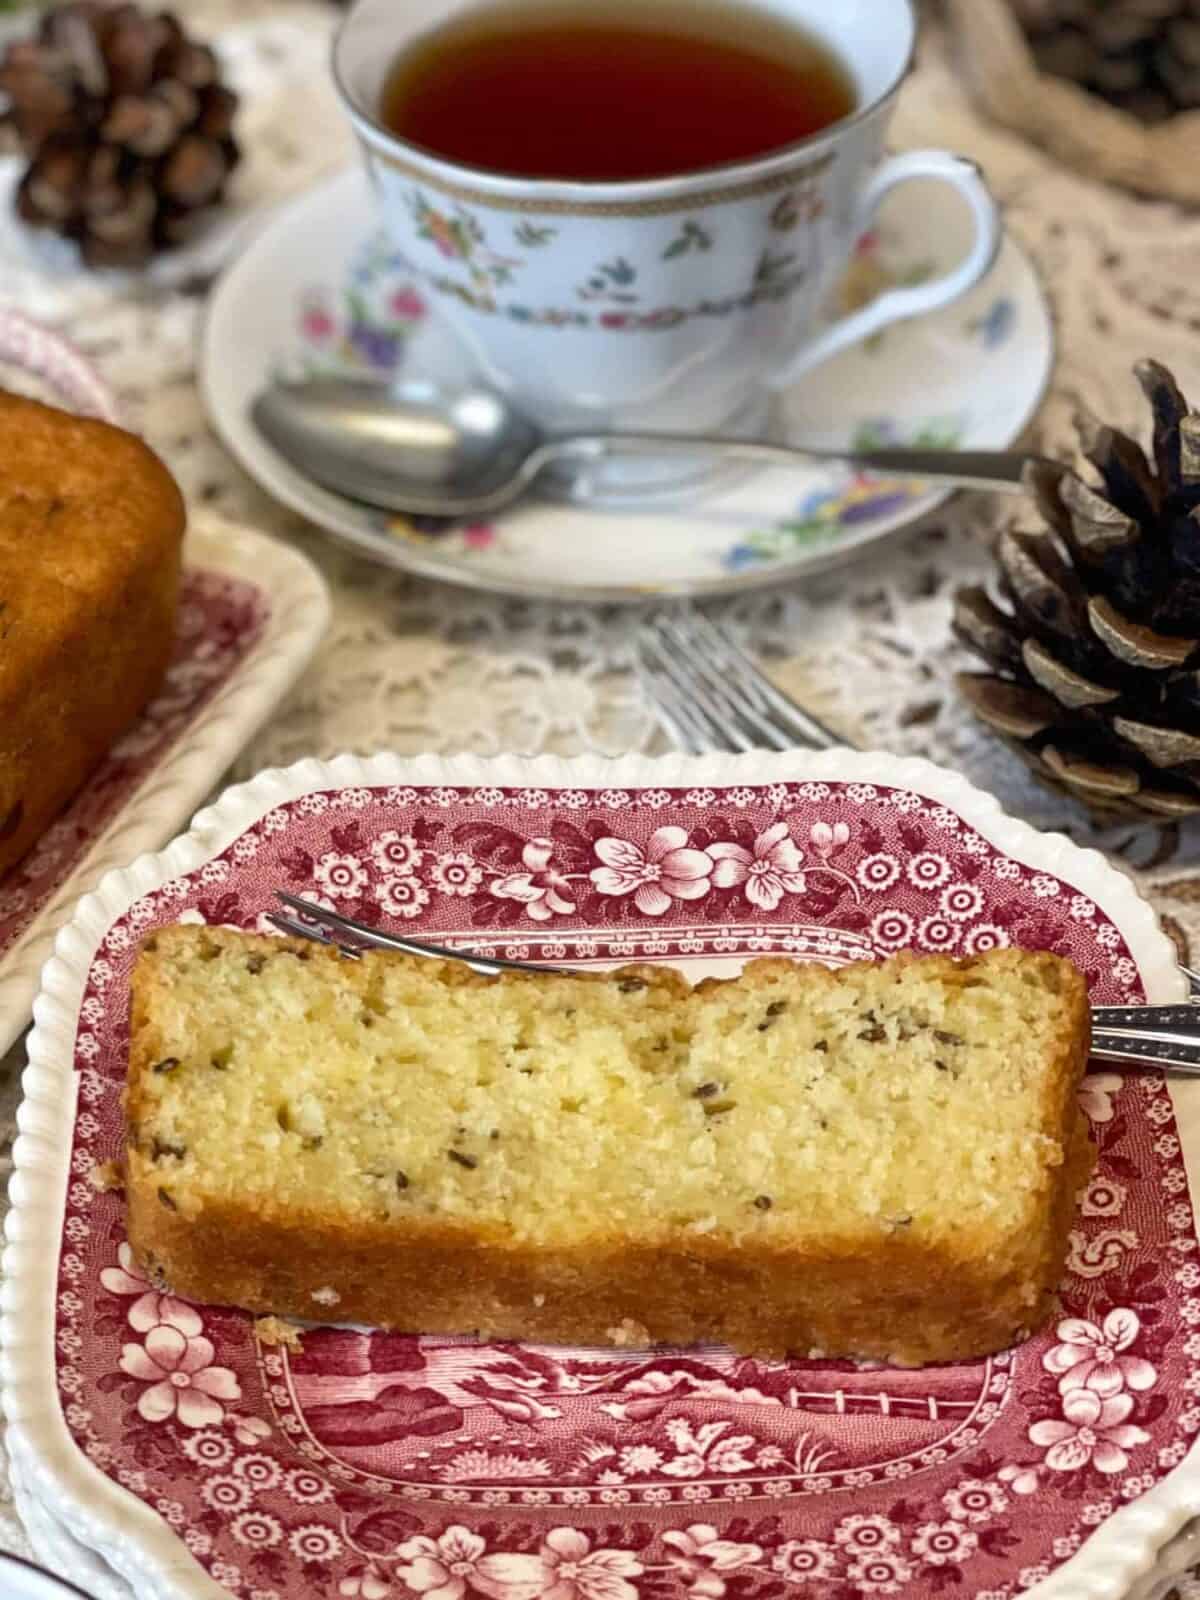 A slice of seed cake on a red patterned vintage small plate with tea cup and saucer with spoon in background.